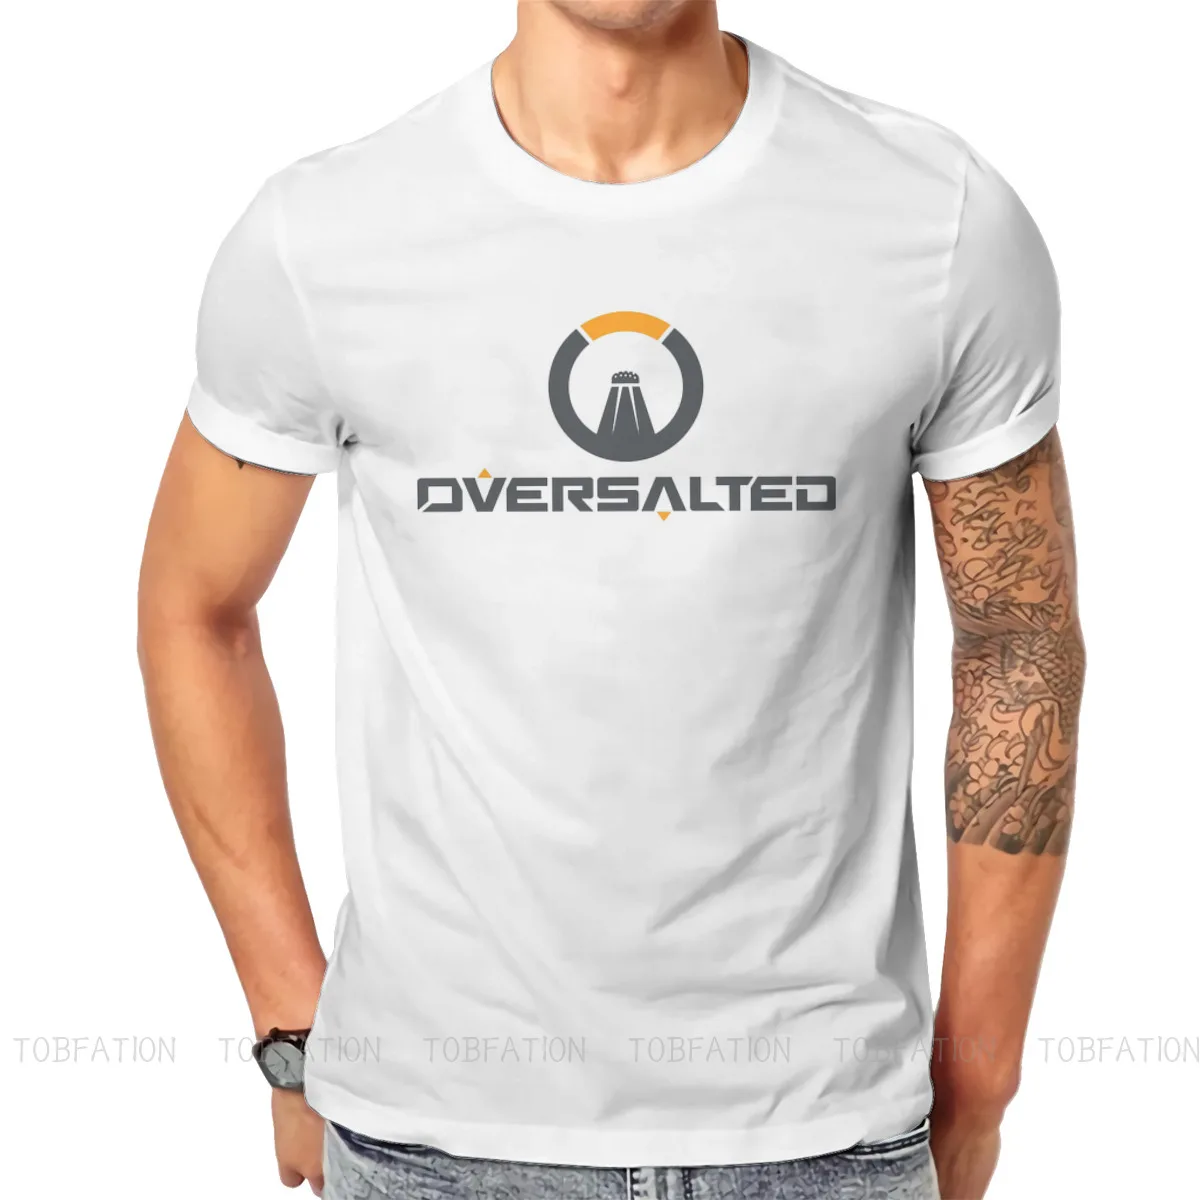 

Overwatch 100% Cotton TShirts Oversalted Distinctive Men's T Shirt New Trend Clothing Size S-6XL